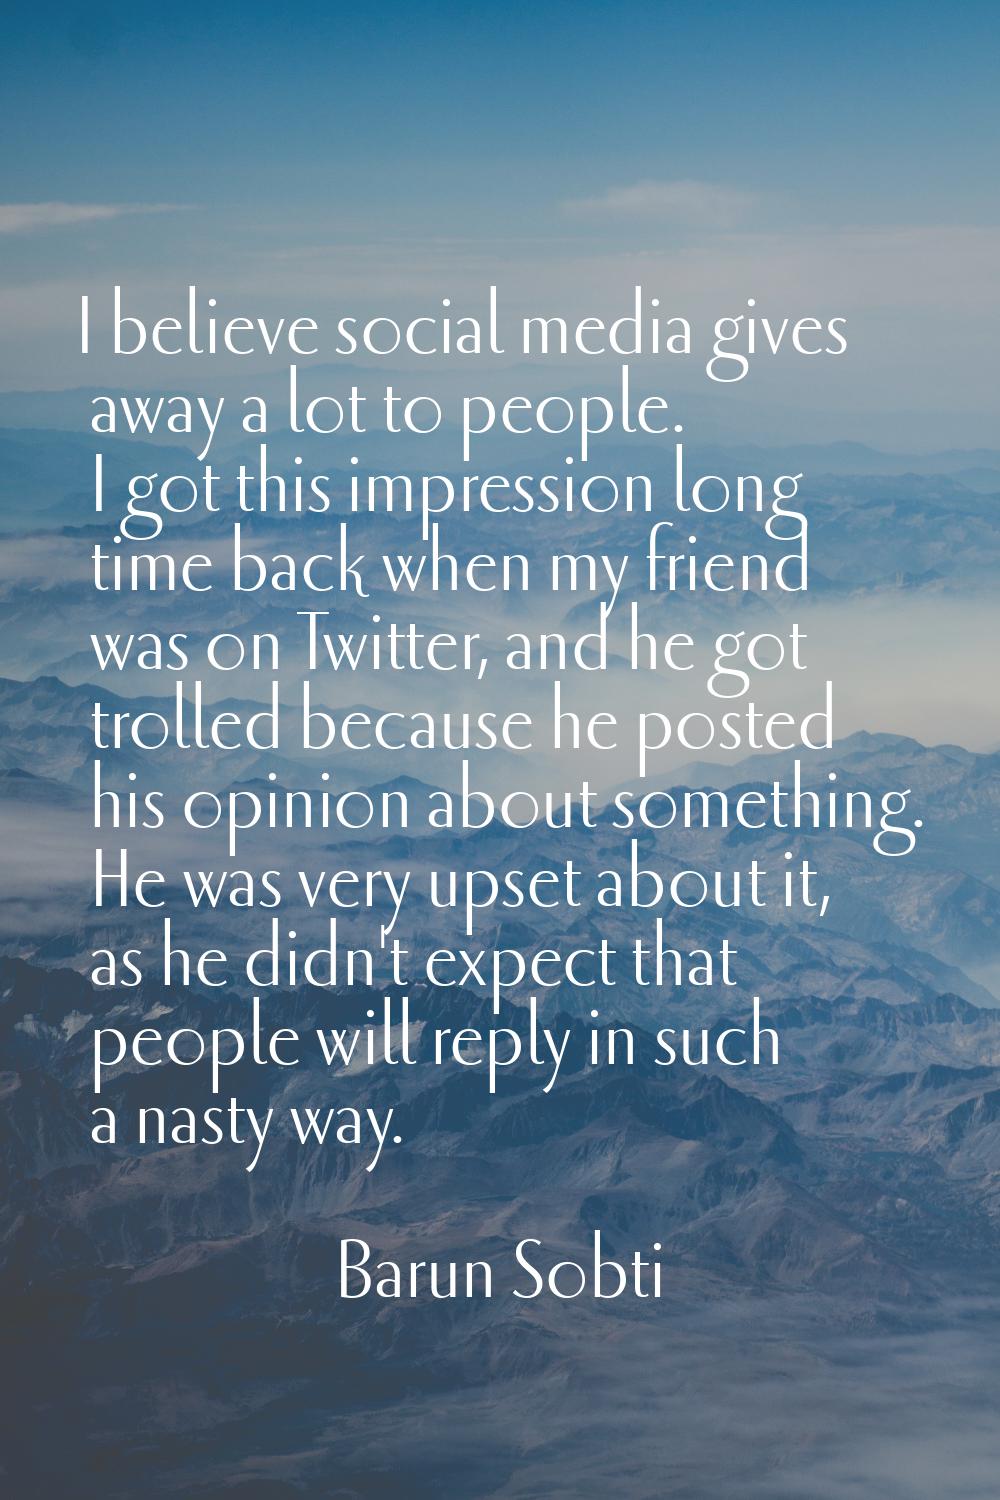 I believe social media gives away a lot to people. I got this impression long time back when my fri